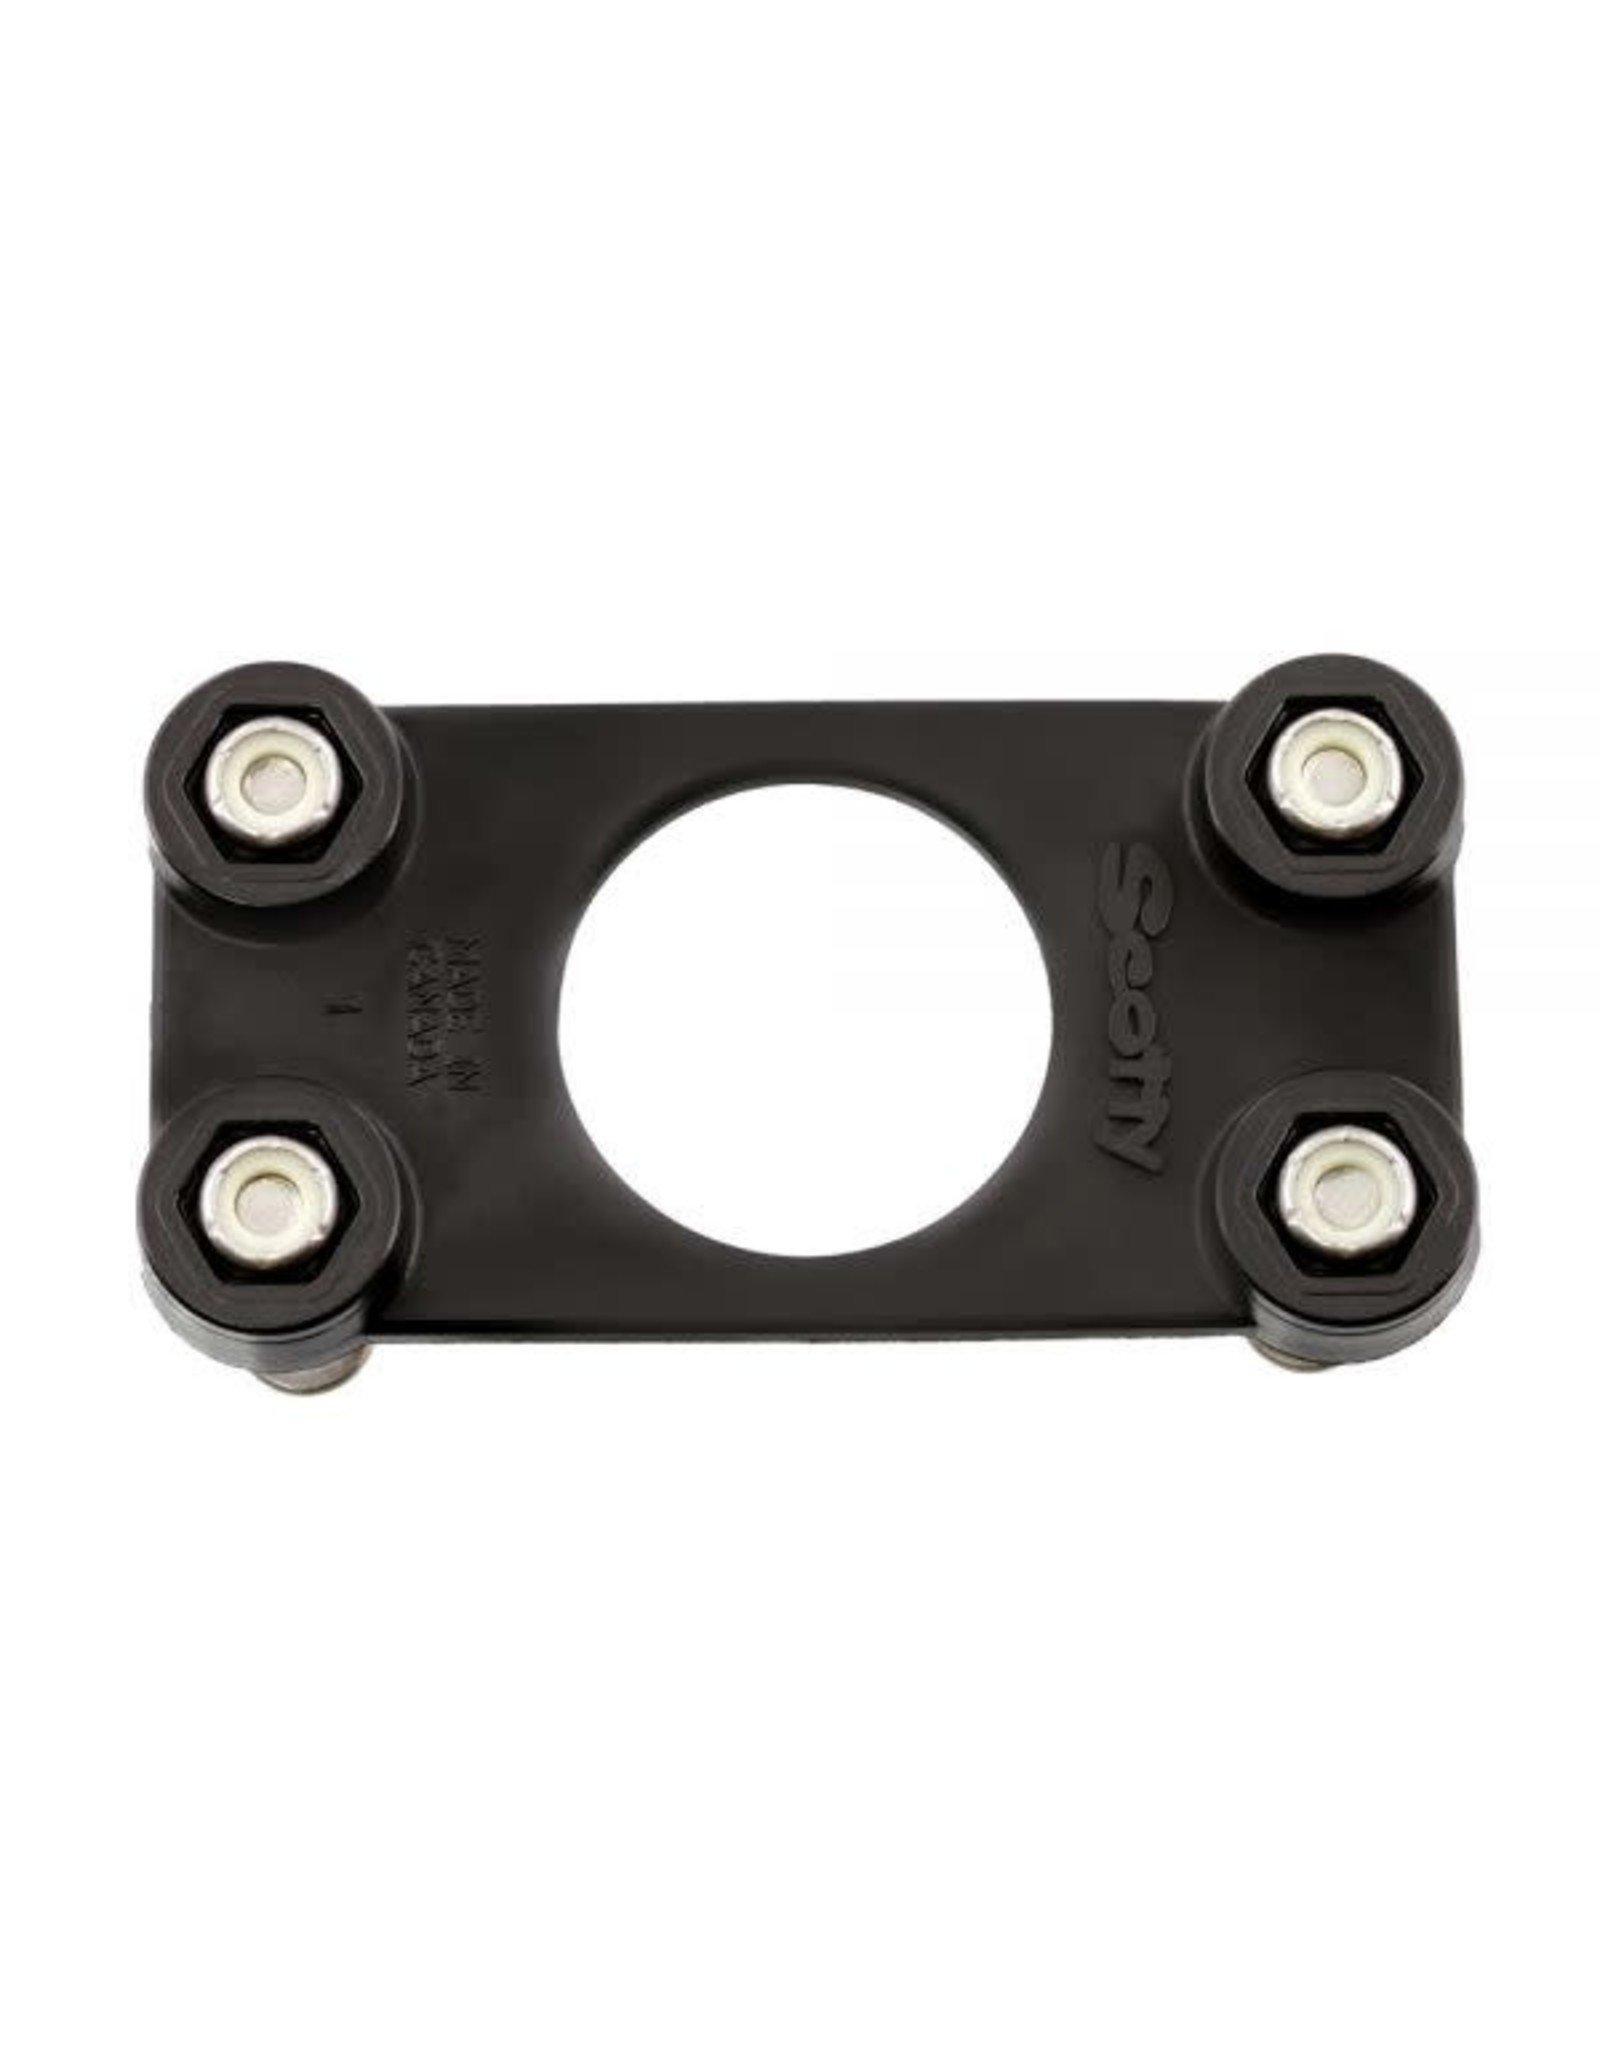 Scotty Scotty Backing Plate for 0241 / 0244 Mount